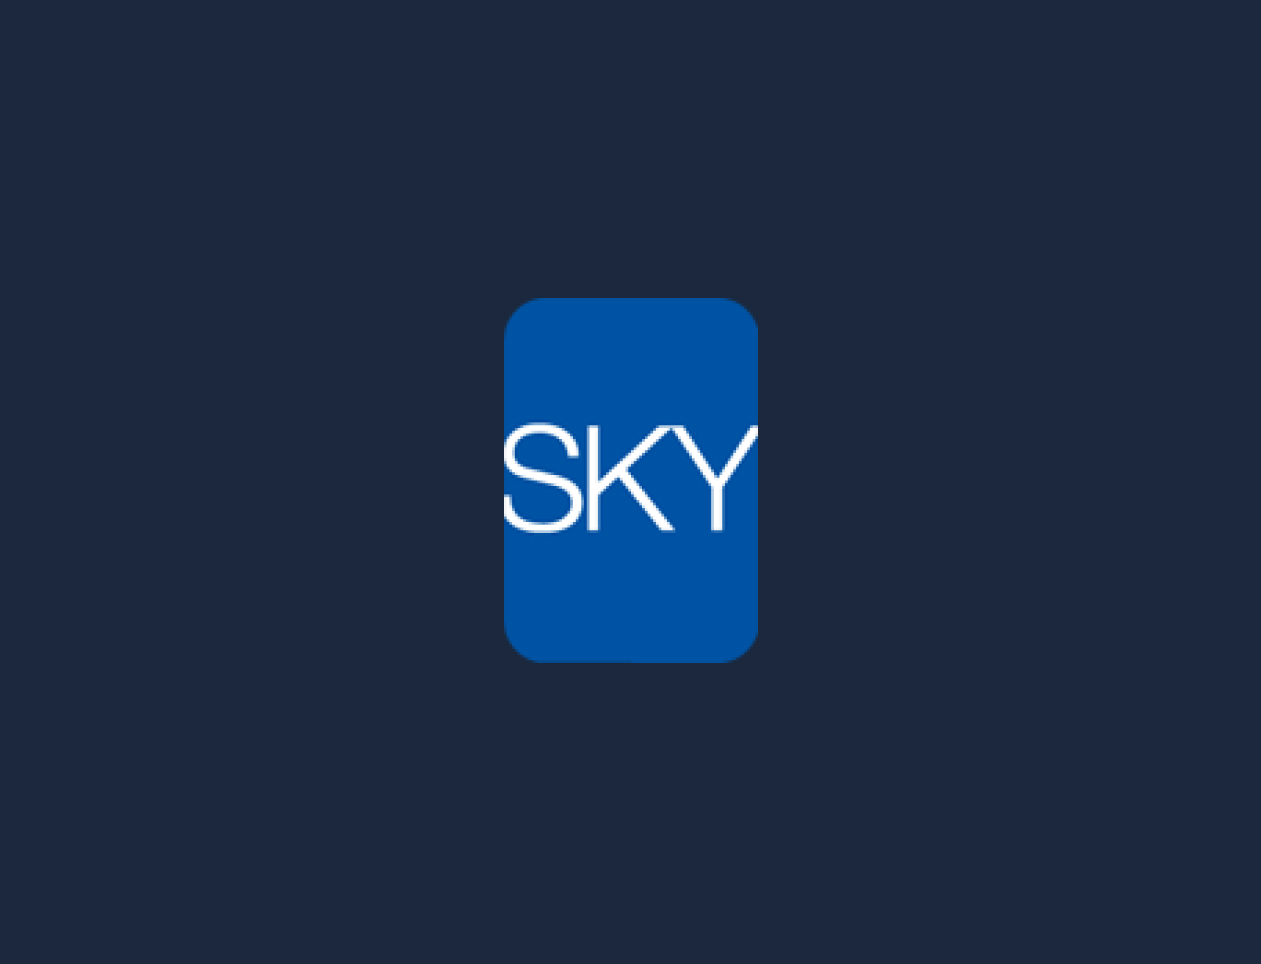 SKY Leasing and M&G Investments Establish Strategic Partnership and Close First Aircraft Fund With $300 Million Investment